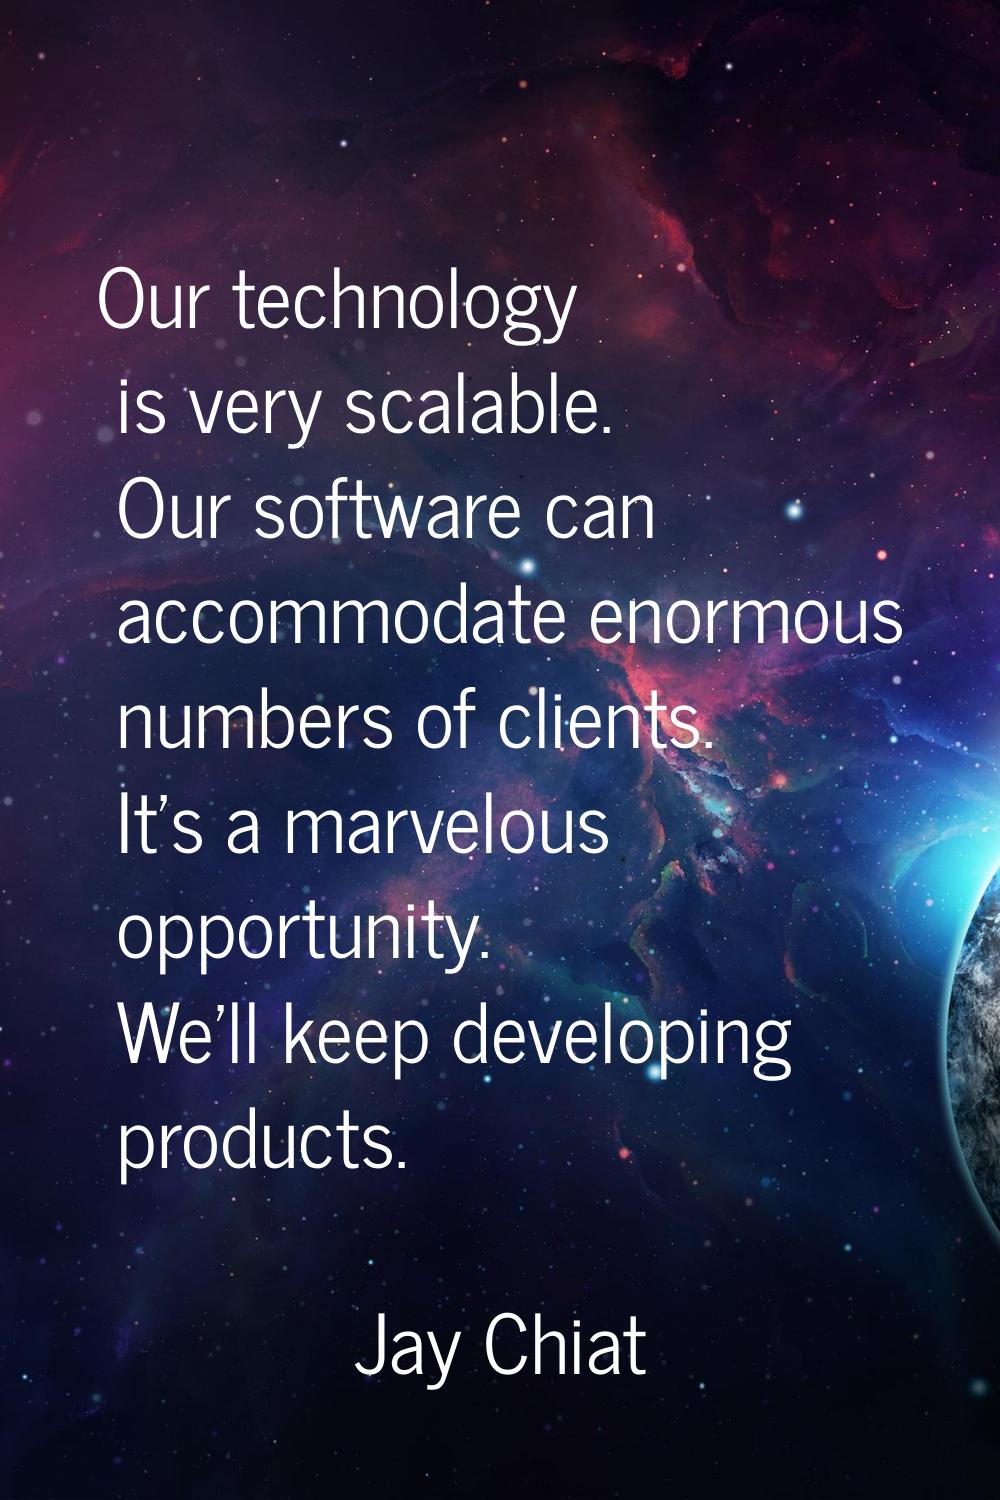 Our technology is very scalable. Our software can accommodate enormous numbers of clients. It's a m